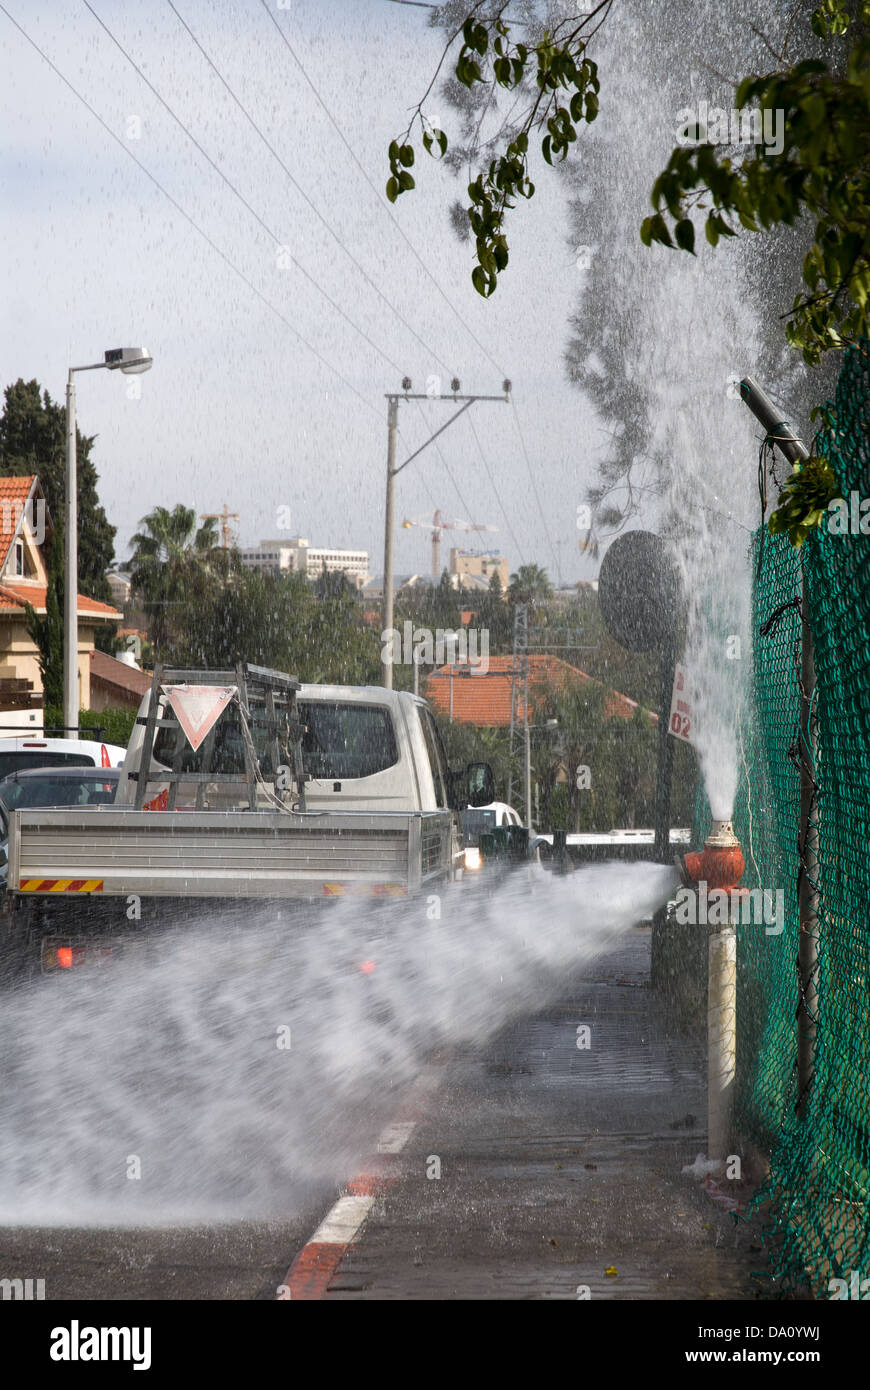 Faulty fire hydrant on the street in a city of Israel Stock Photo